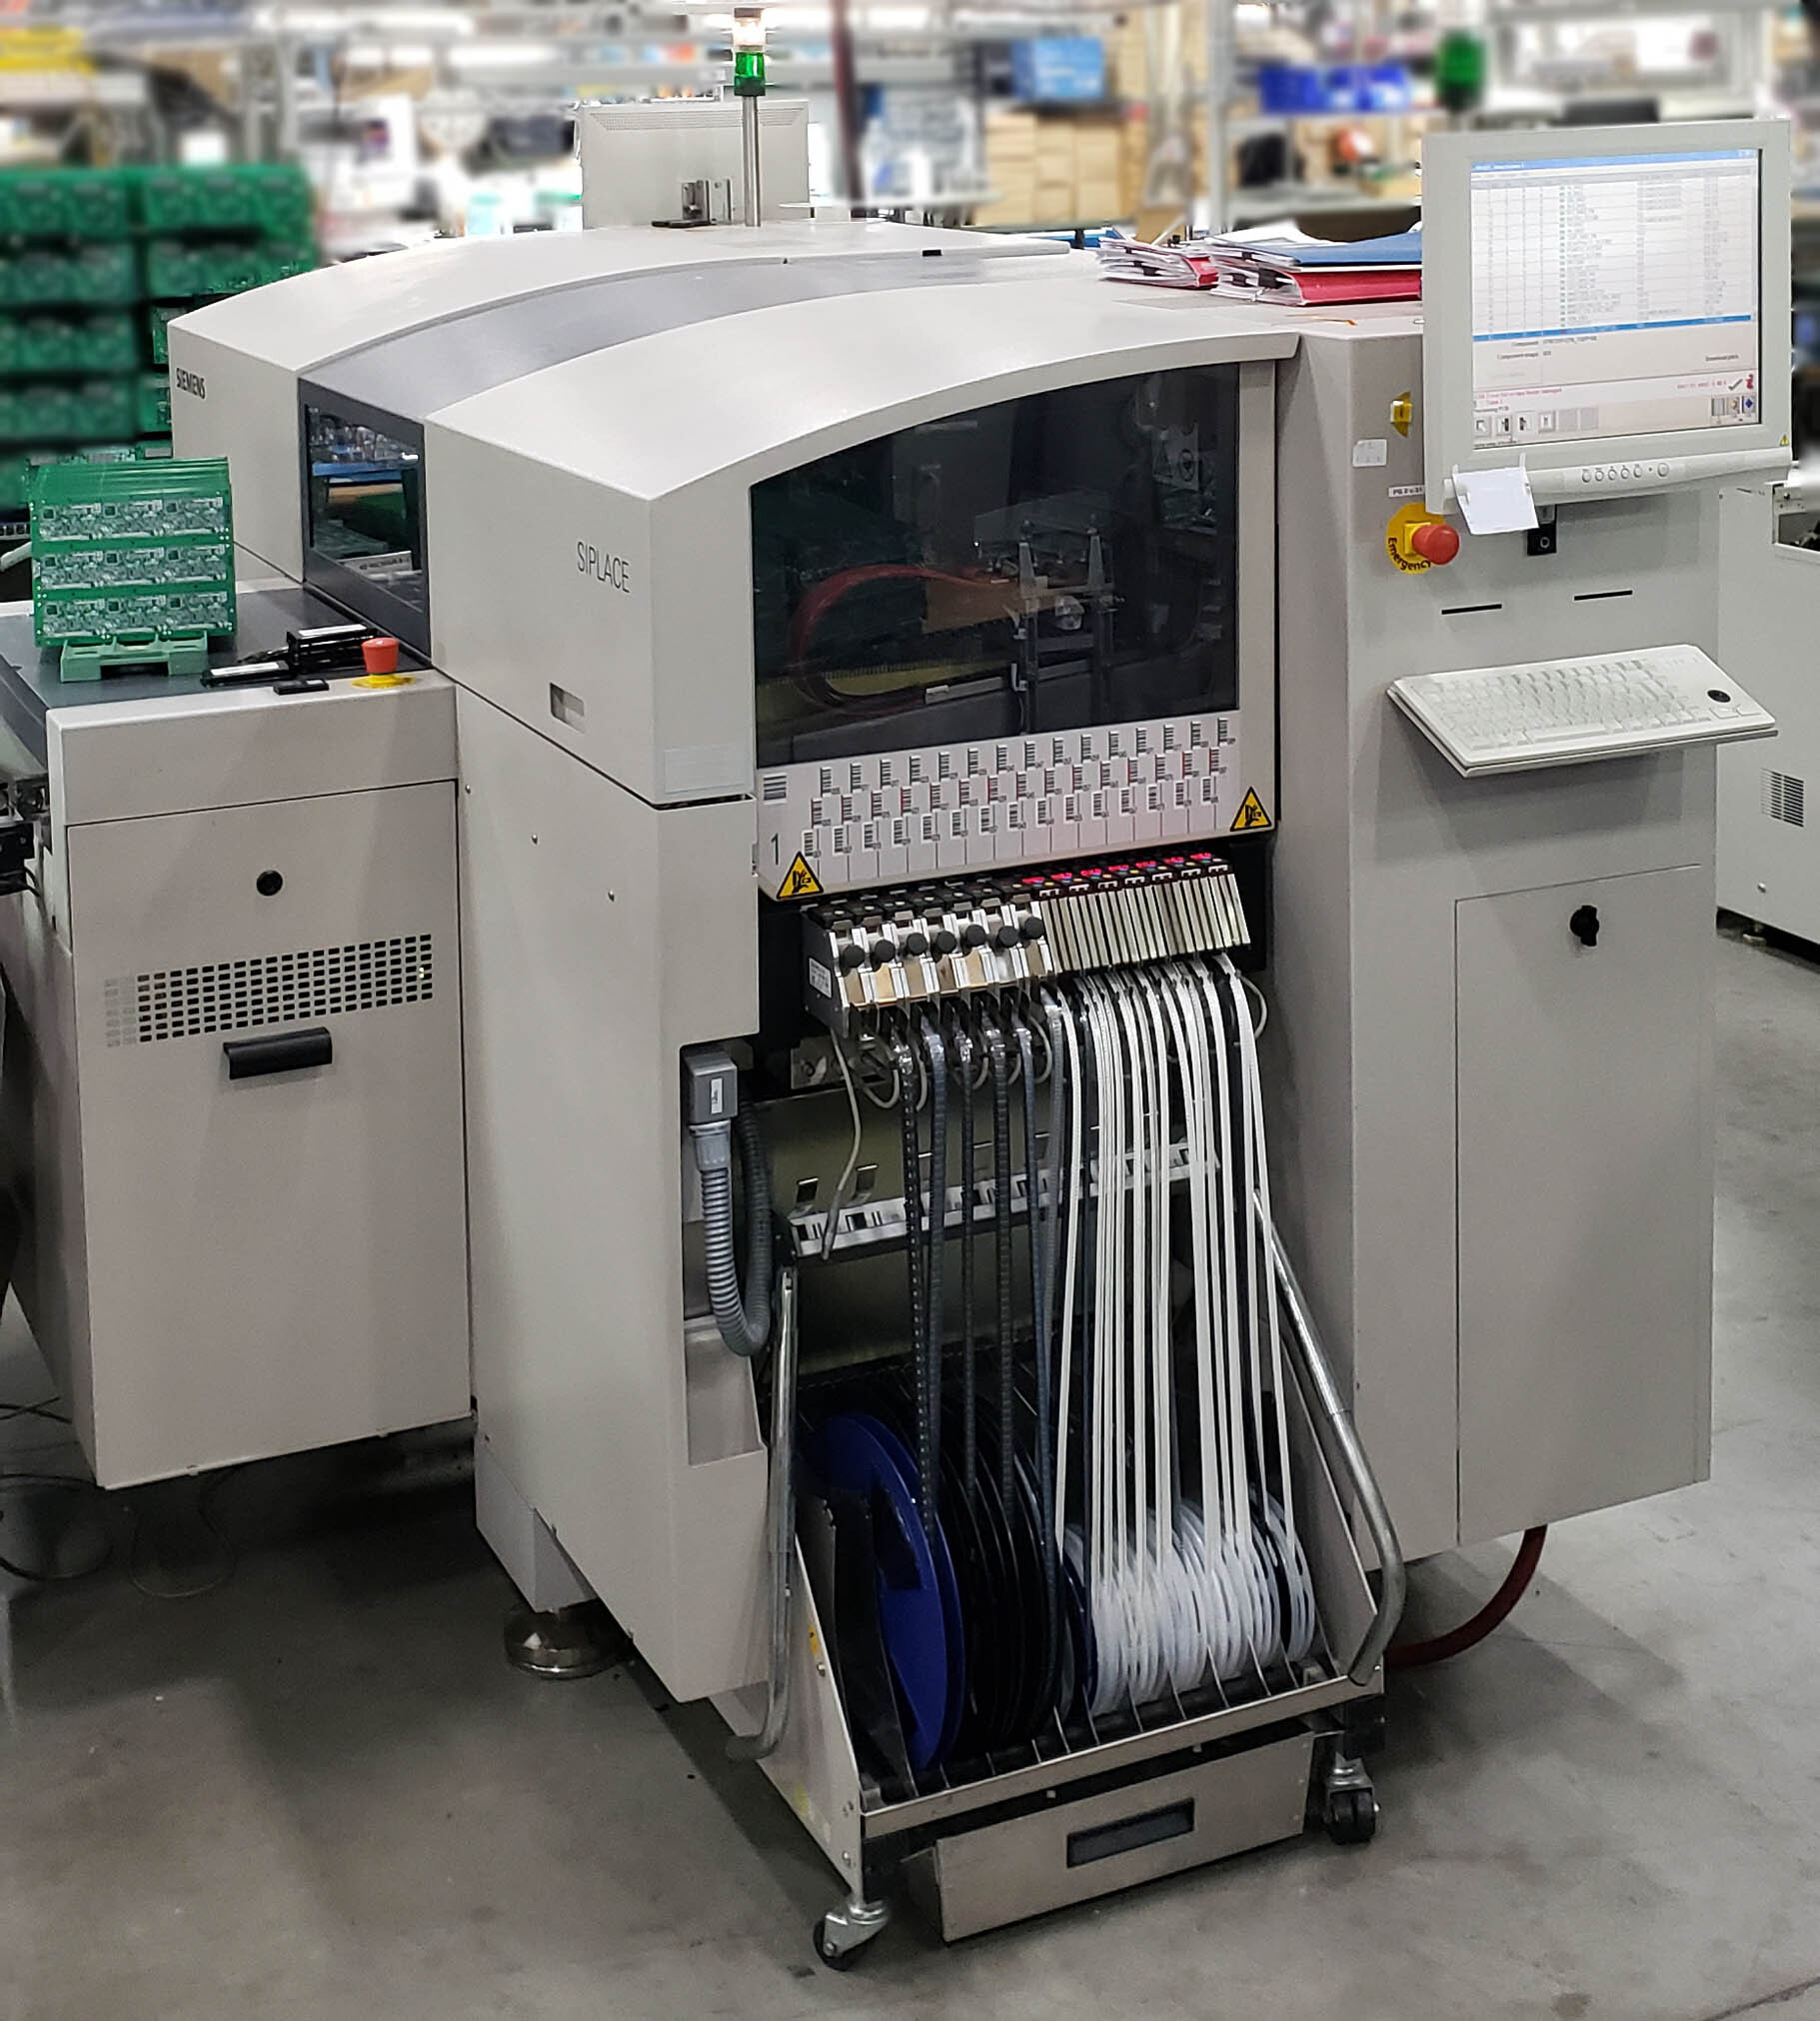 Photo Used ASM / SIEMENS Siplace D2 For Sale